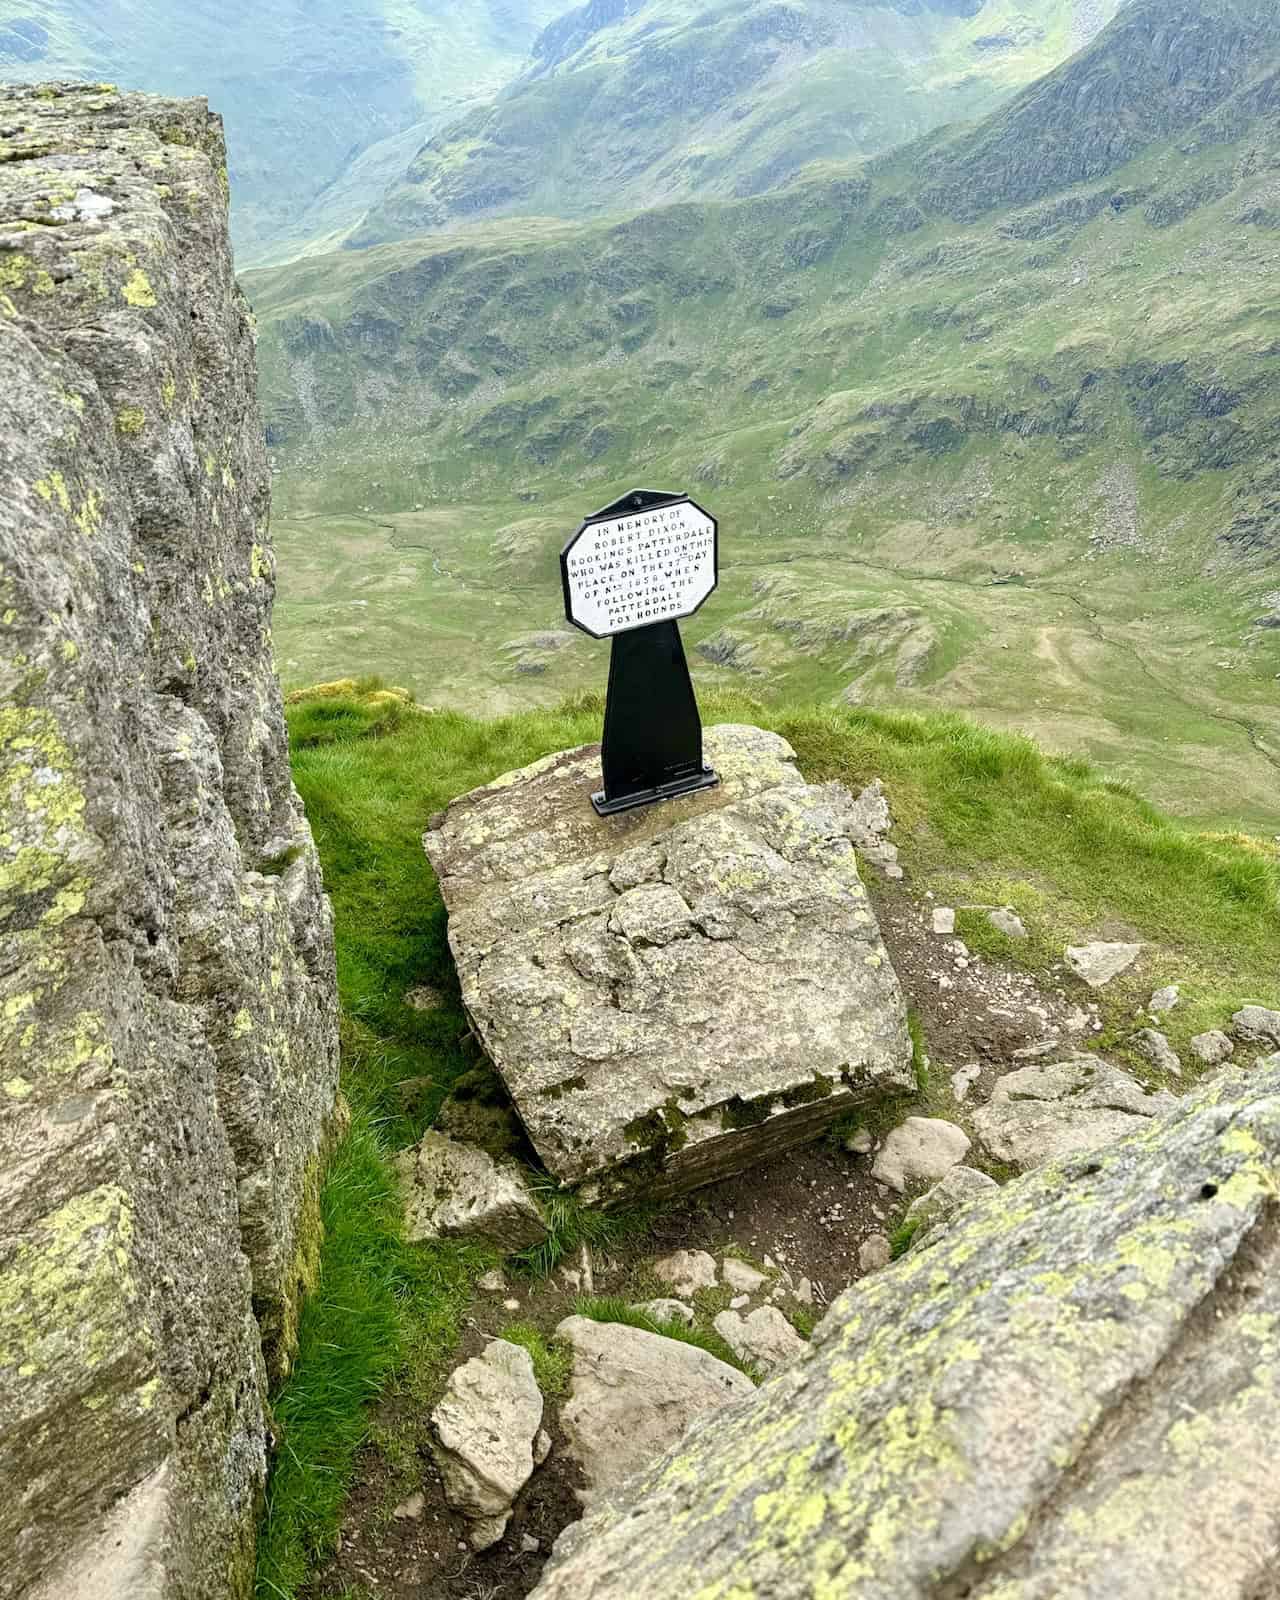 A memorial cross at High Spying How marks our traverse across Striding Edge and is a memorable part of the Helvellyn via Striding Edge walk.